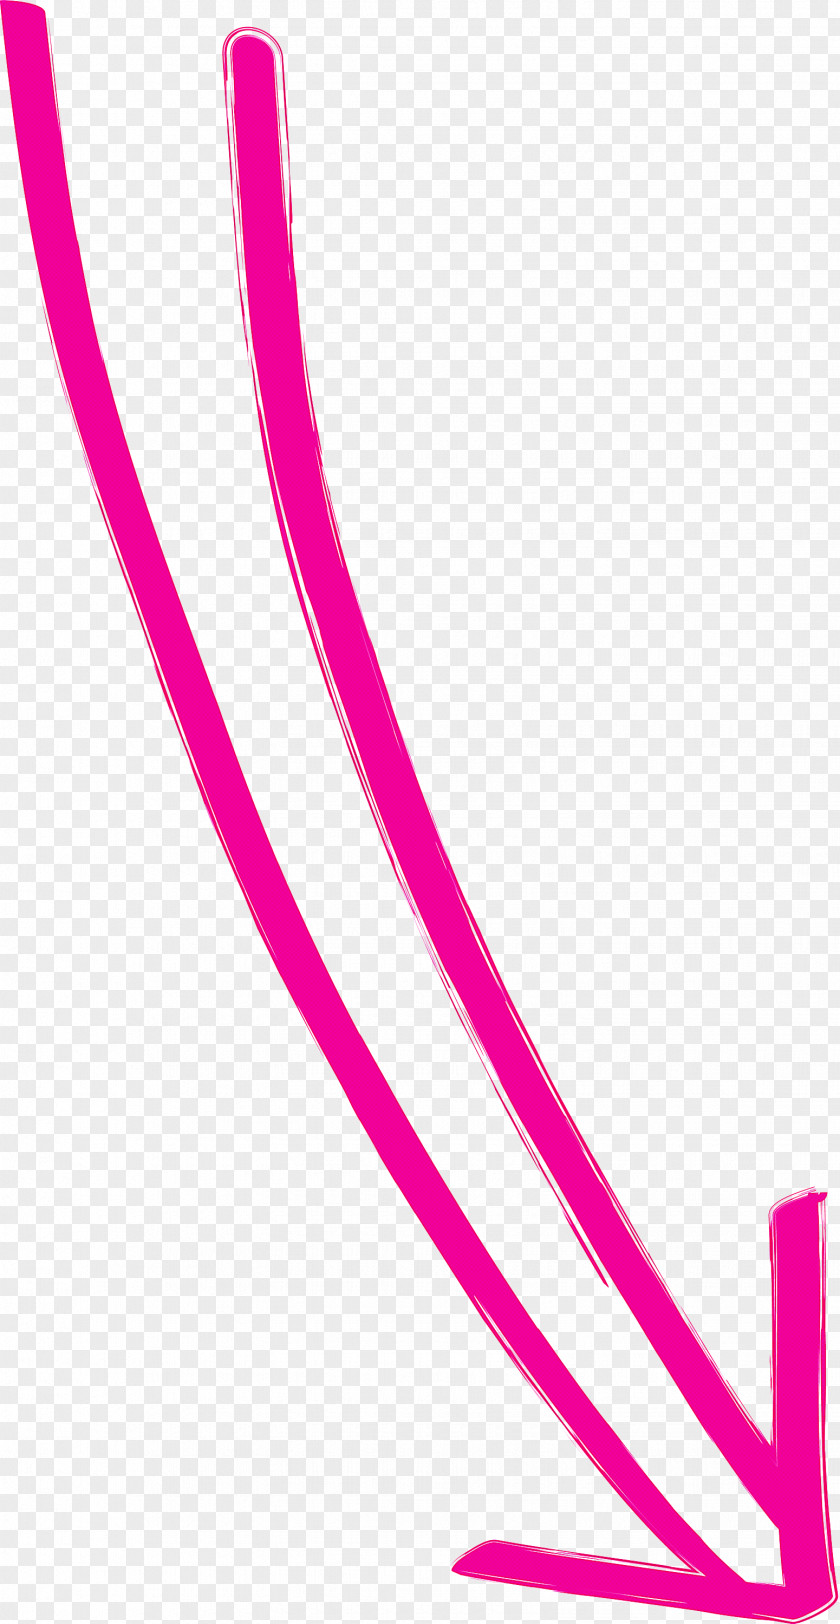 Hand Drawn Arrow PNG